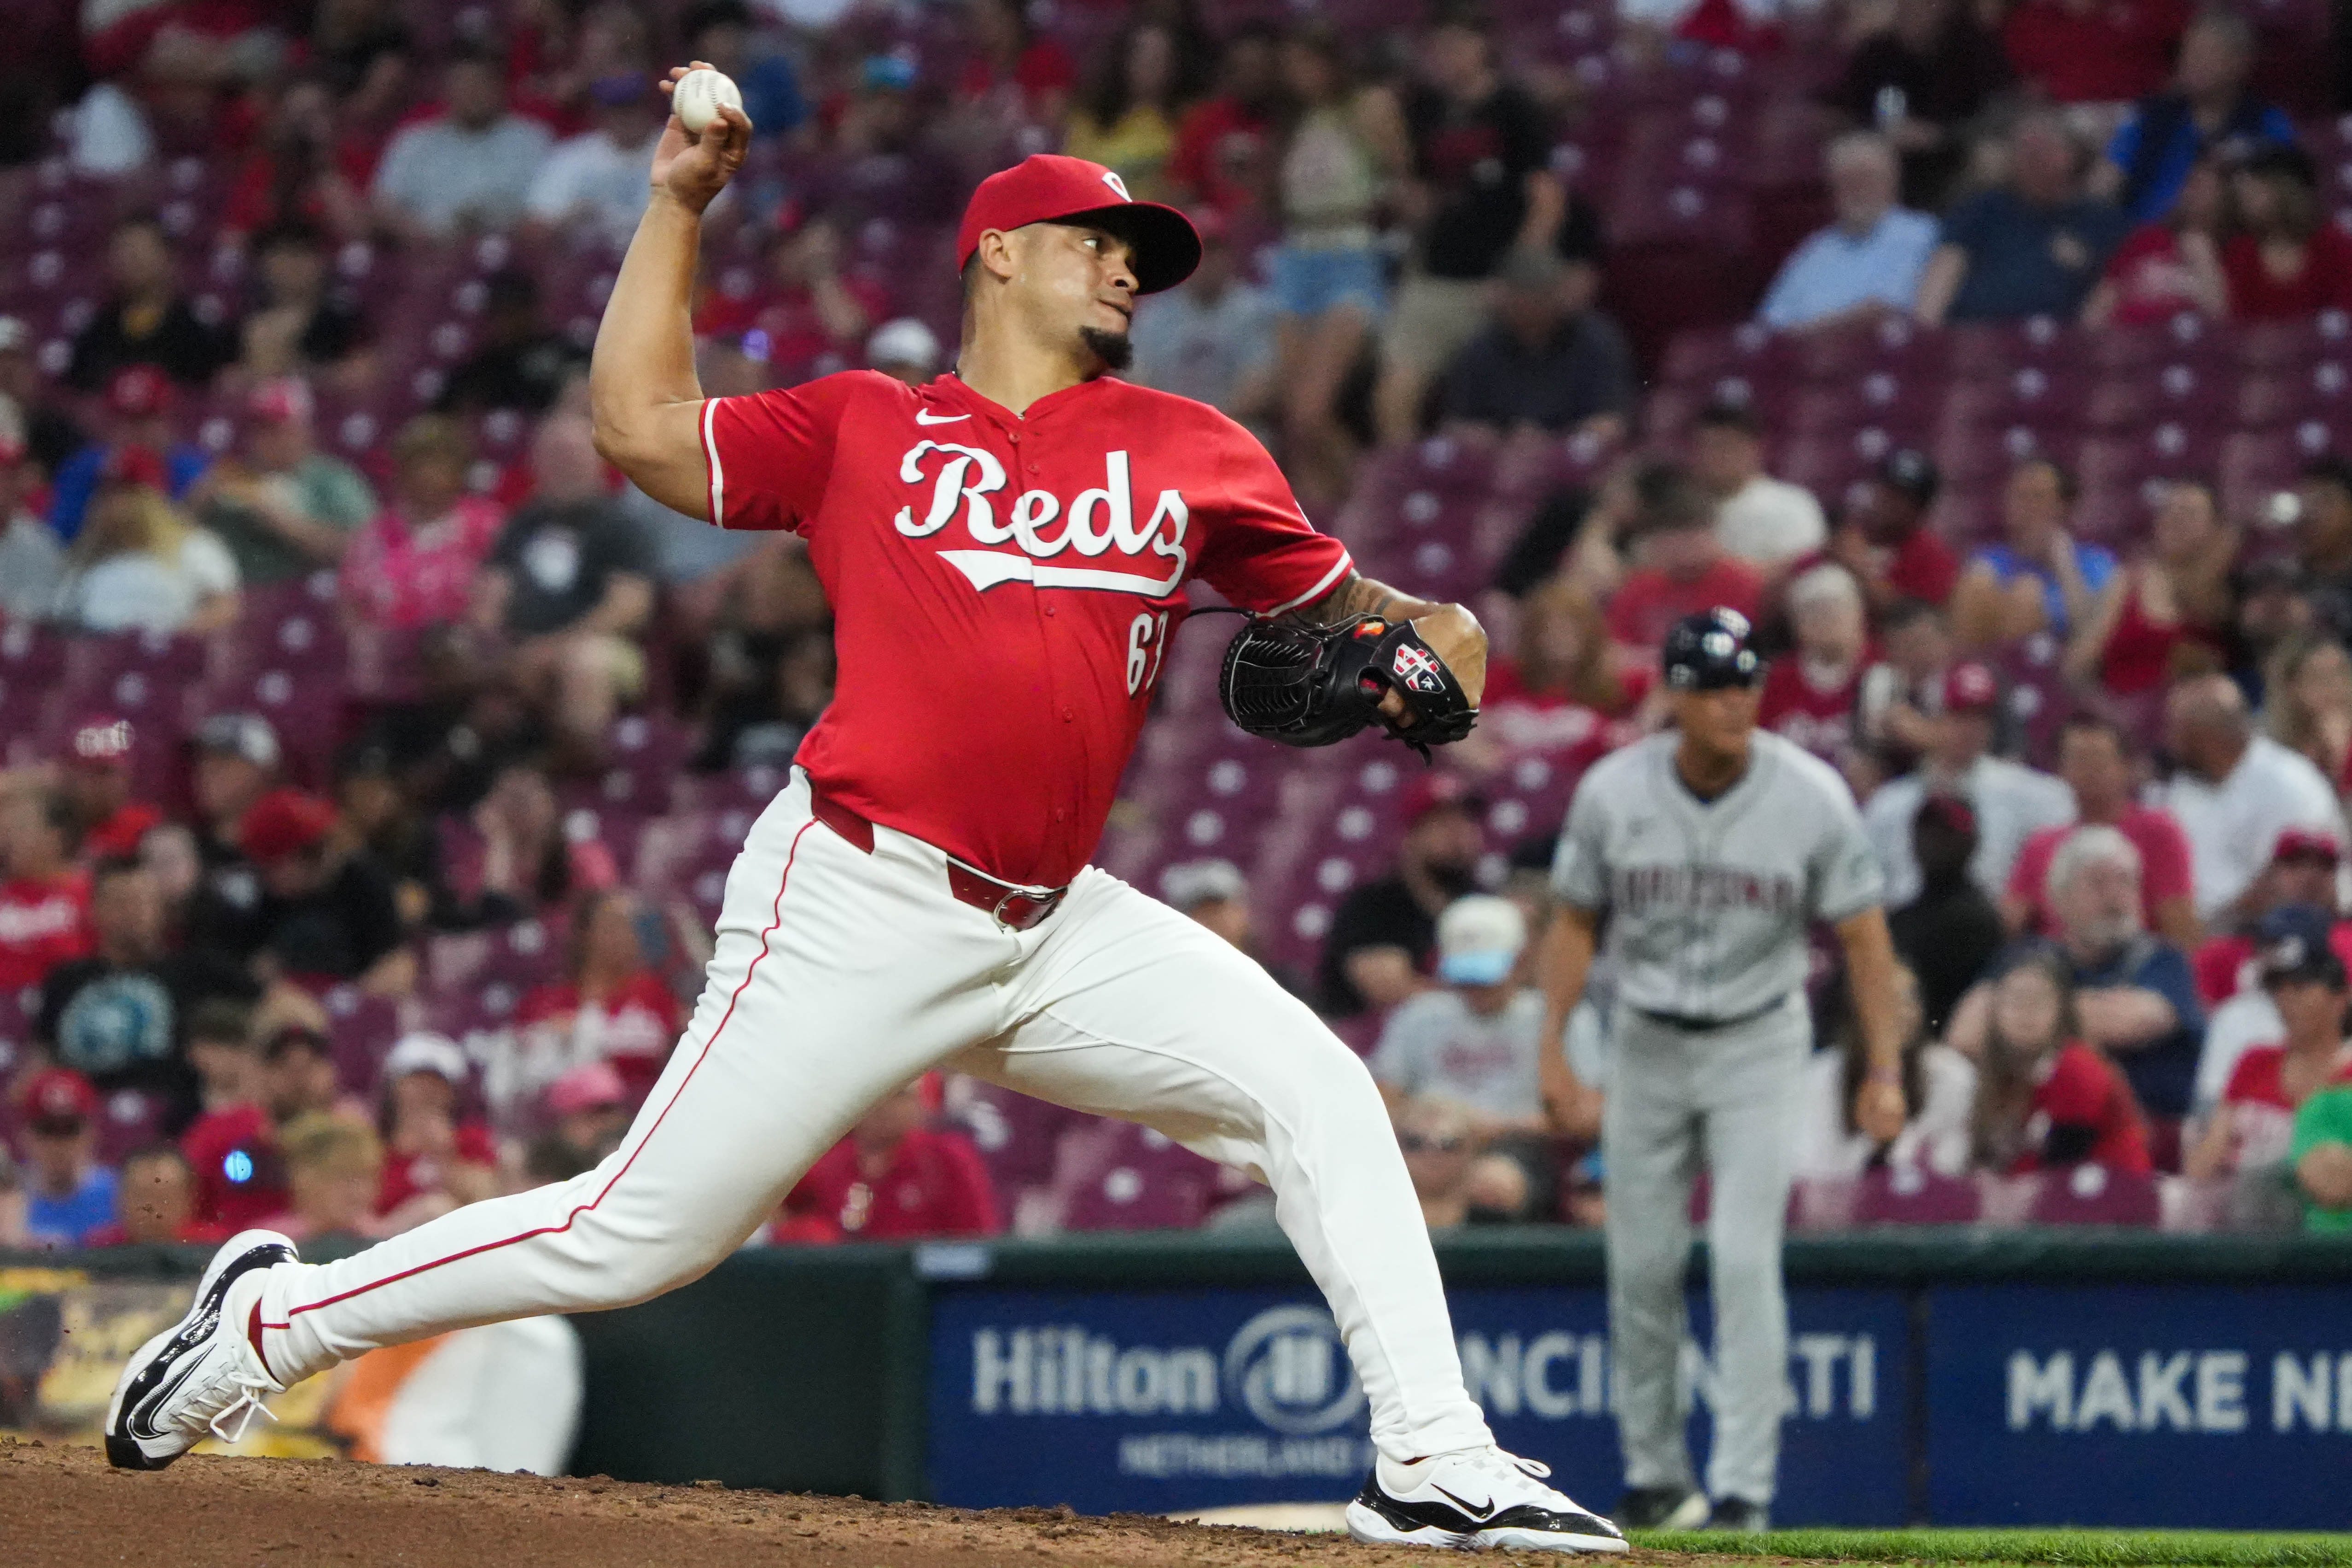 Reds look to extend season-long winning streak in Game 2 against Cardinals Tuesday